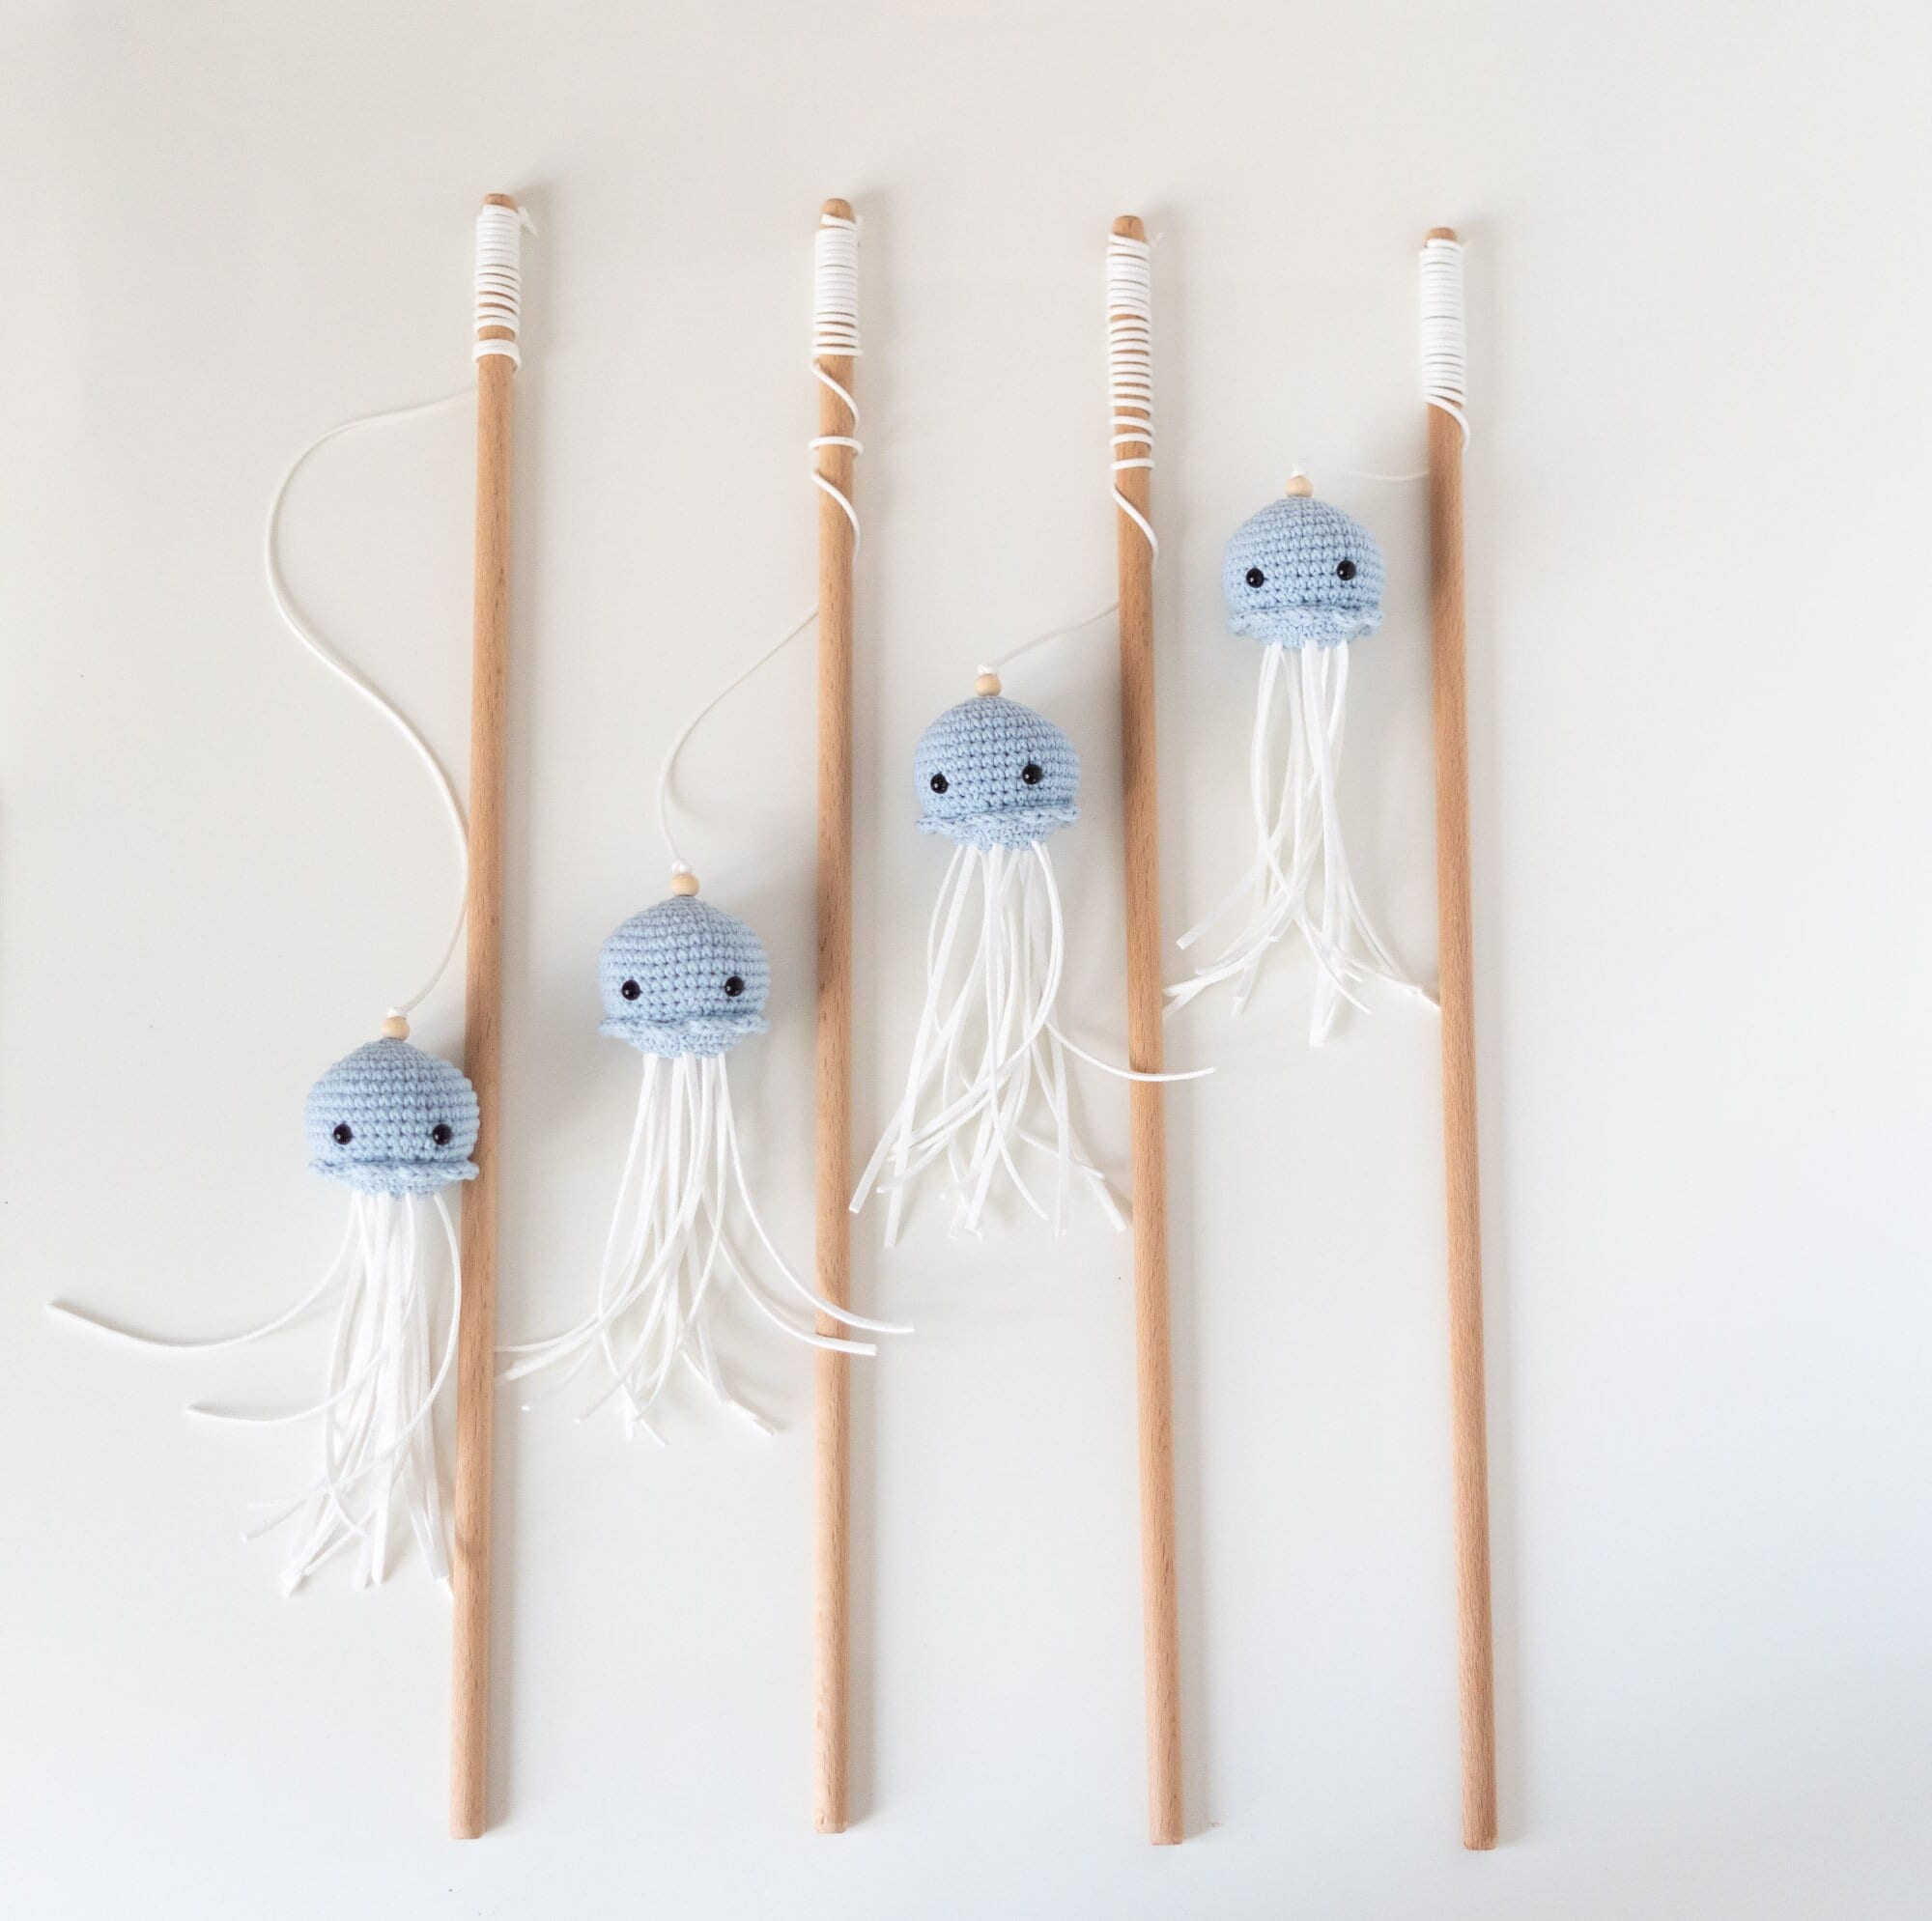 Cute Cat Teaser, Cat Wand, Jellyfish Cat Toys, Fishing Pole for Cats, Cat  Fishing, Catnip Cat Toy, Wooded Pole for Cat, Catnip Toys, Blue -   Ireland